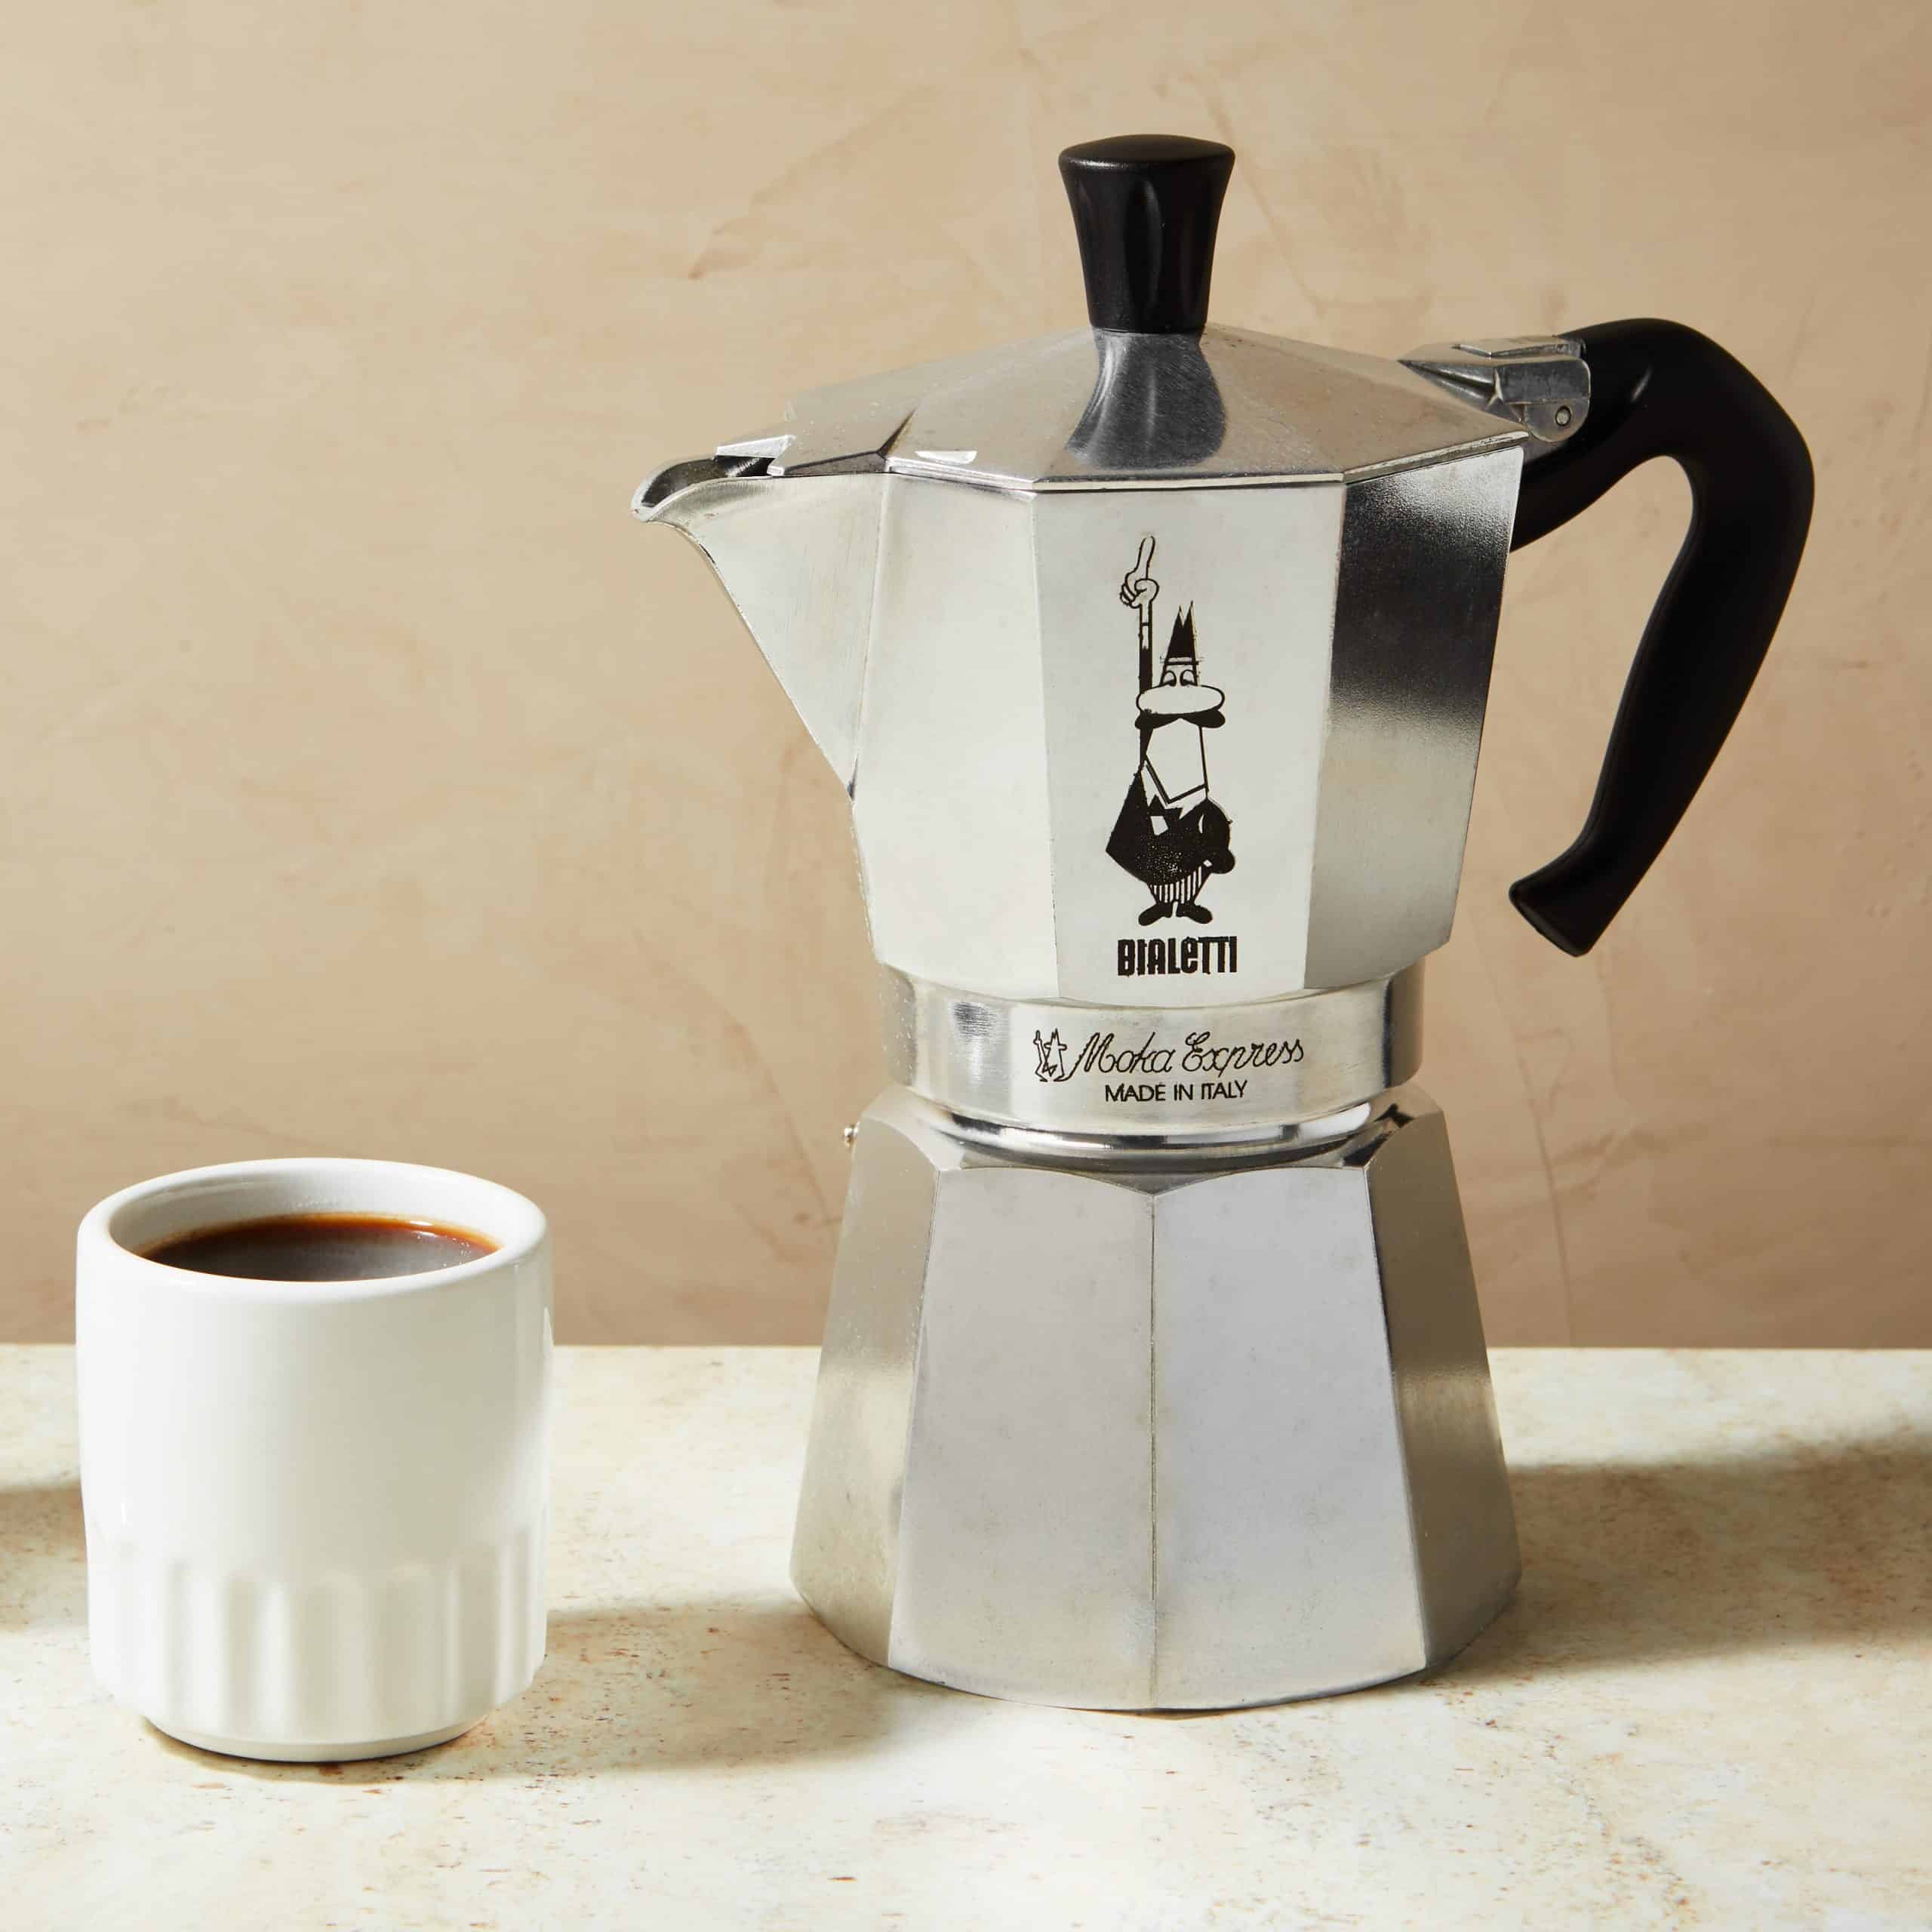 What Kind Of Coffee Do You Use In A Bialetti Moka?